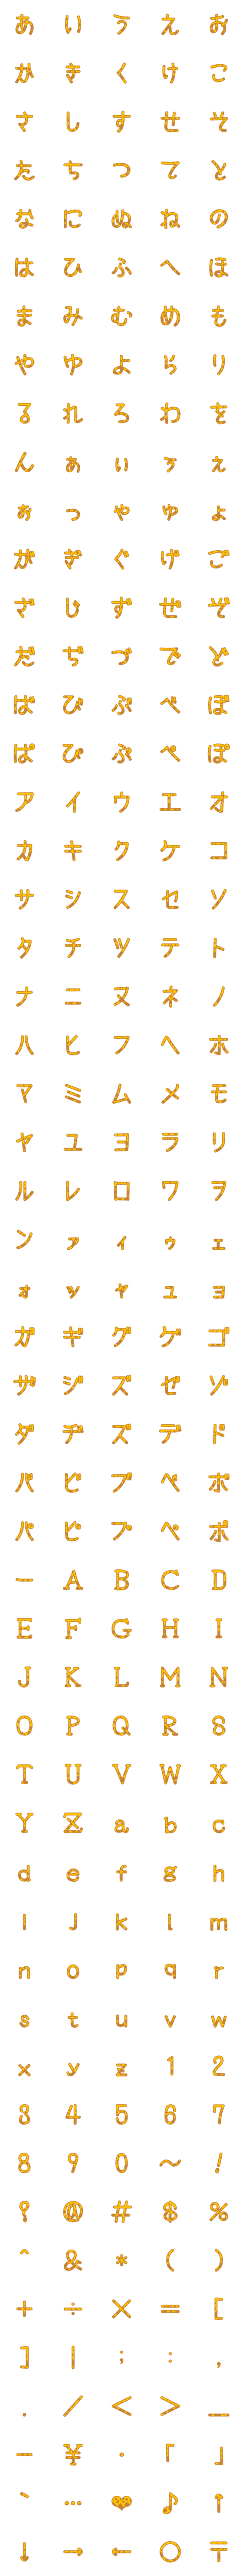 [LINE絵文字]キリン柄絵文字の画像一覧